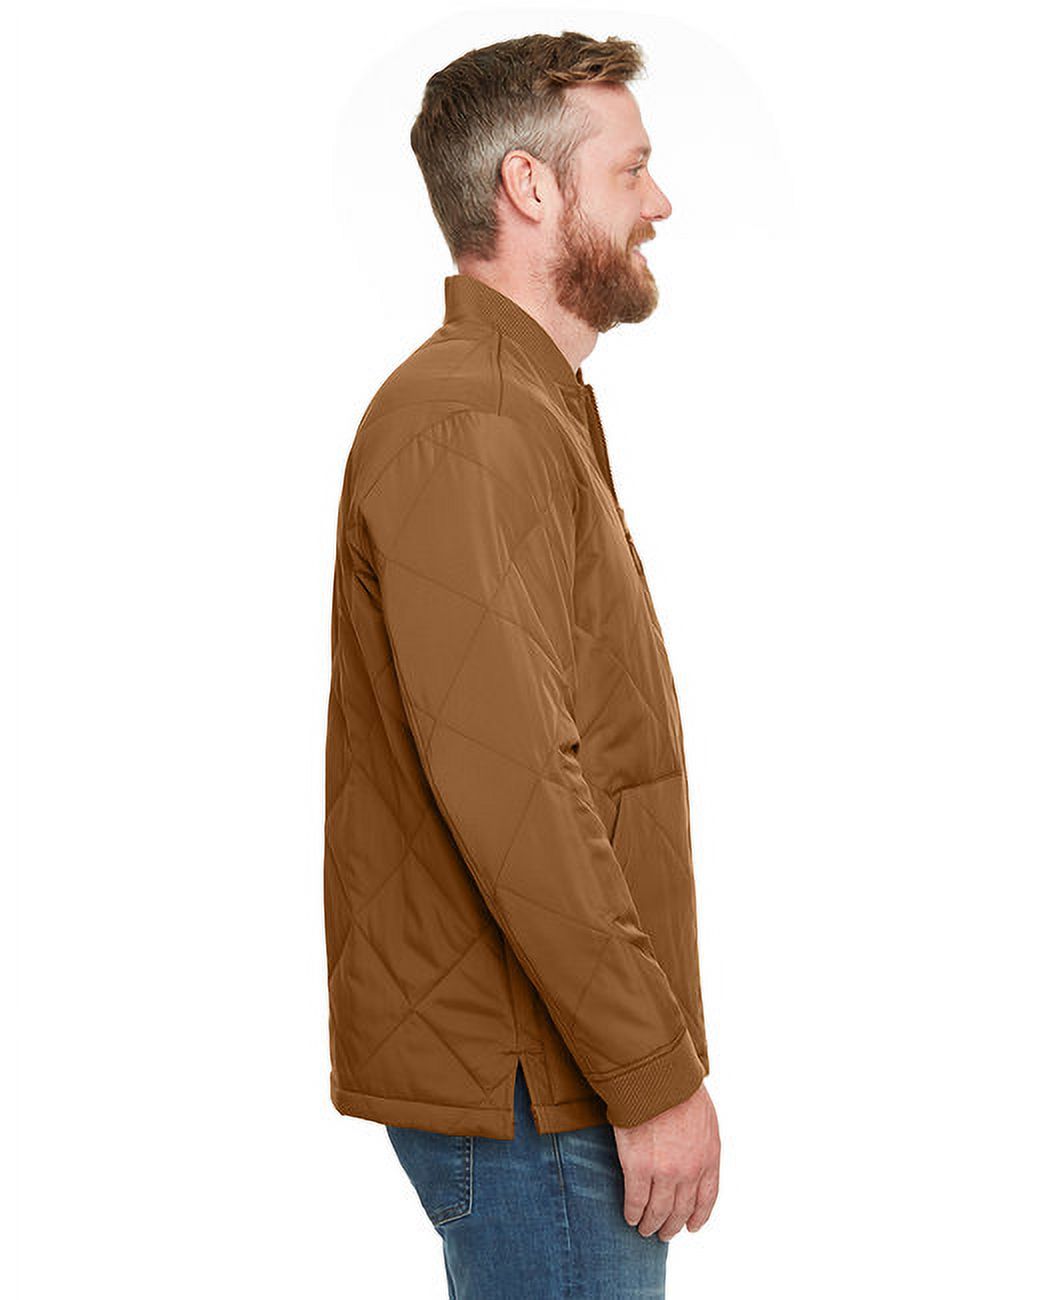 Adult Dockside Insulated Utility Jacket - DUCK BROWN - L - image 3 of 3